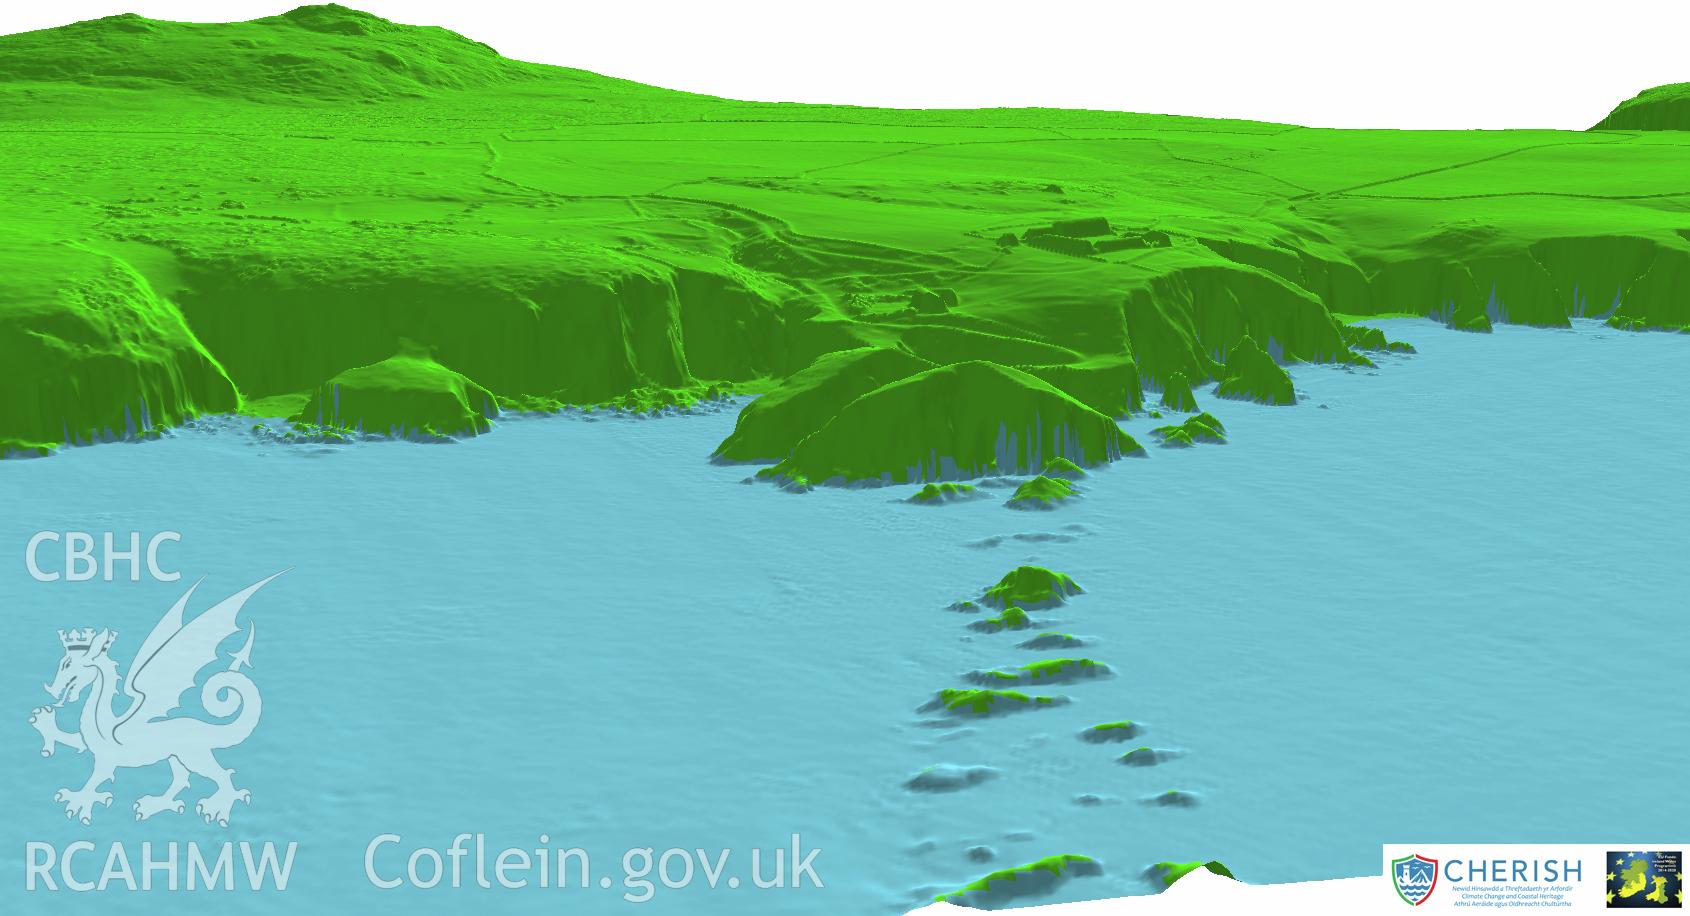 Ramsey Island. Airborne laser scanning (LiDAR) commissioned by the CHERISH Project 2017-2021, flown by Bluesky International LTD at low tide on 24th February 2017. View showing the island from the east, along The Bitches reef towards Ramsey Island Farm.